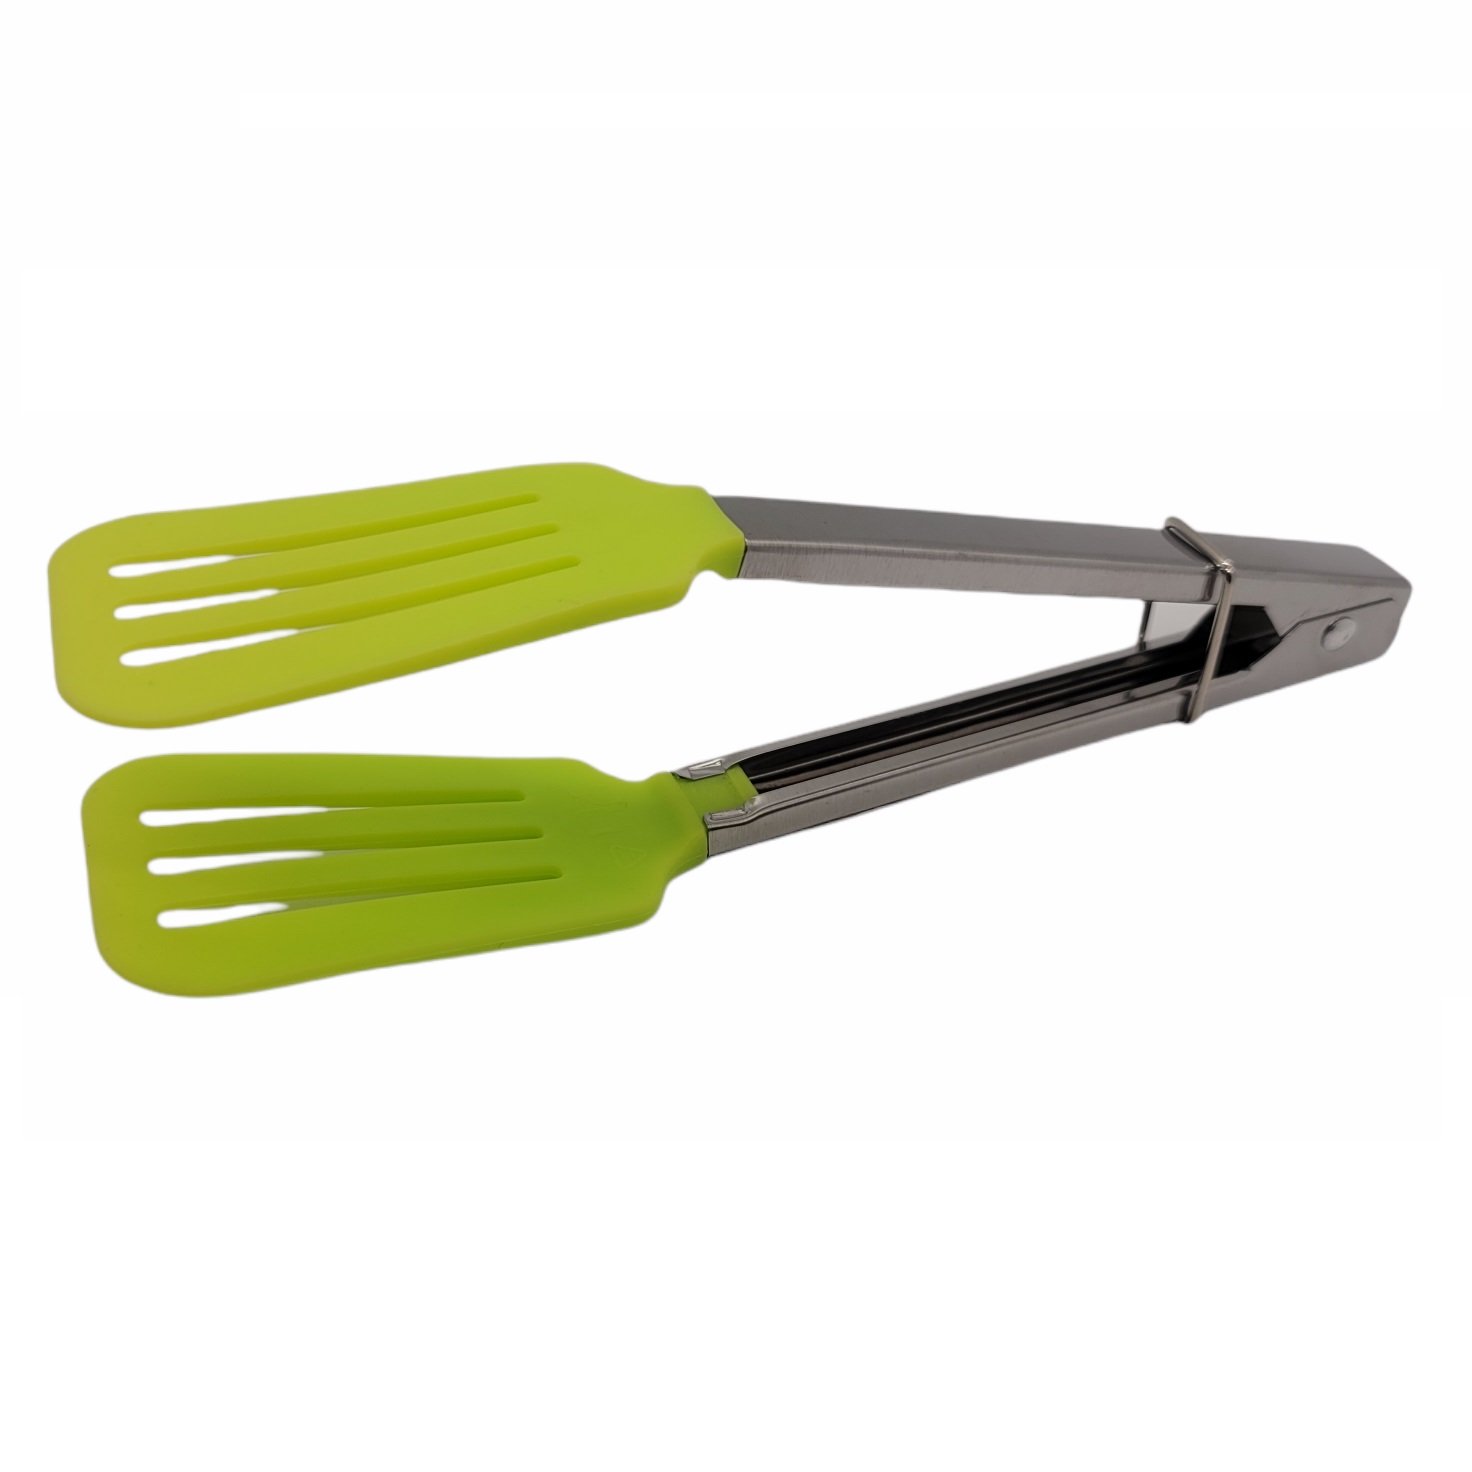 9 Stainless Tongs w/ Green Handle